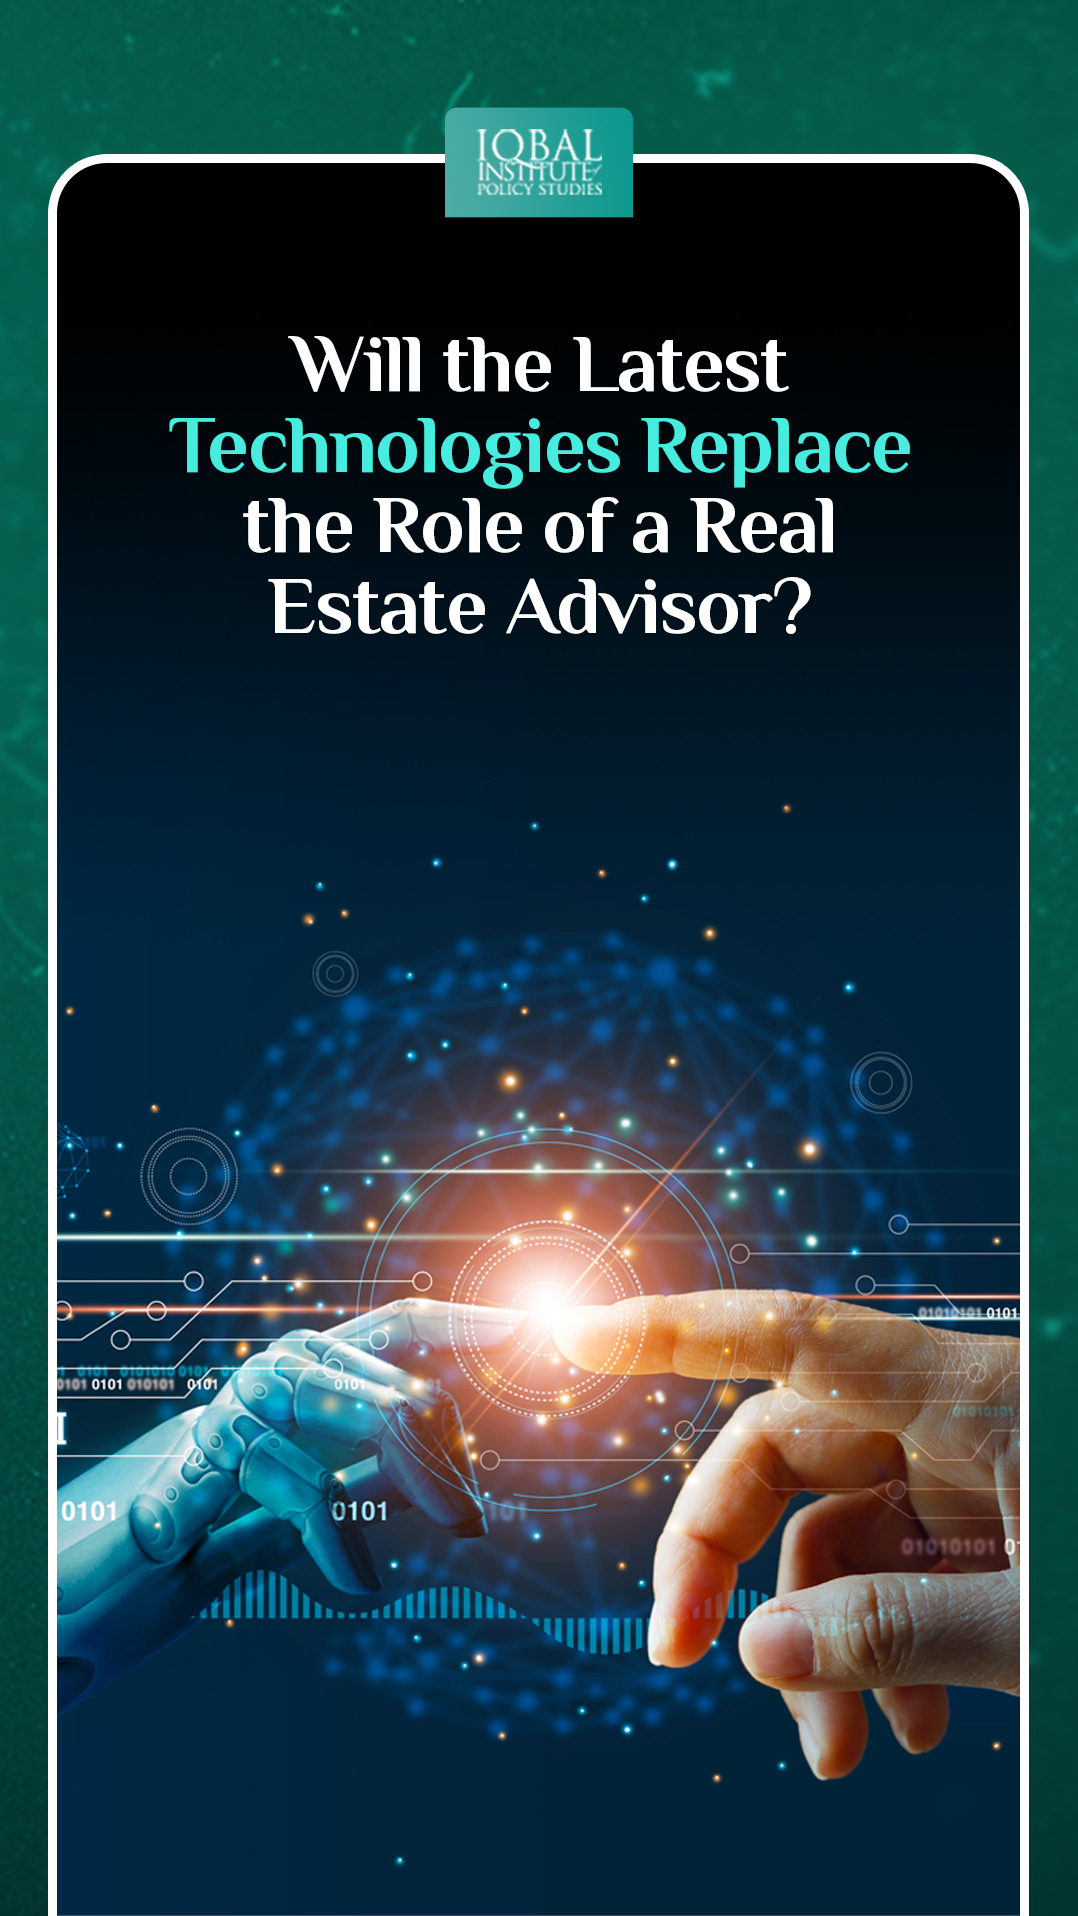 Will the Latest Technologies Replace the Role of a Real Estate Advisor?